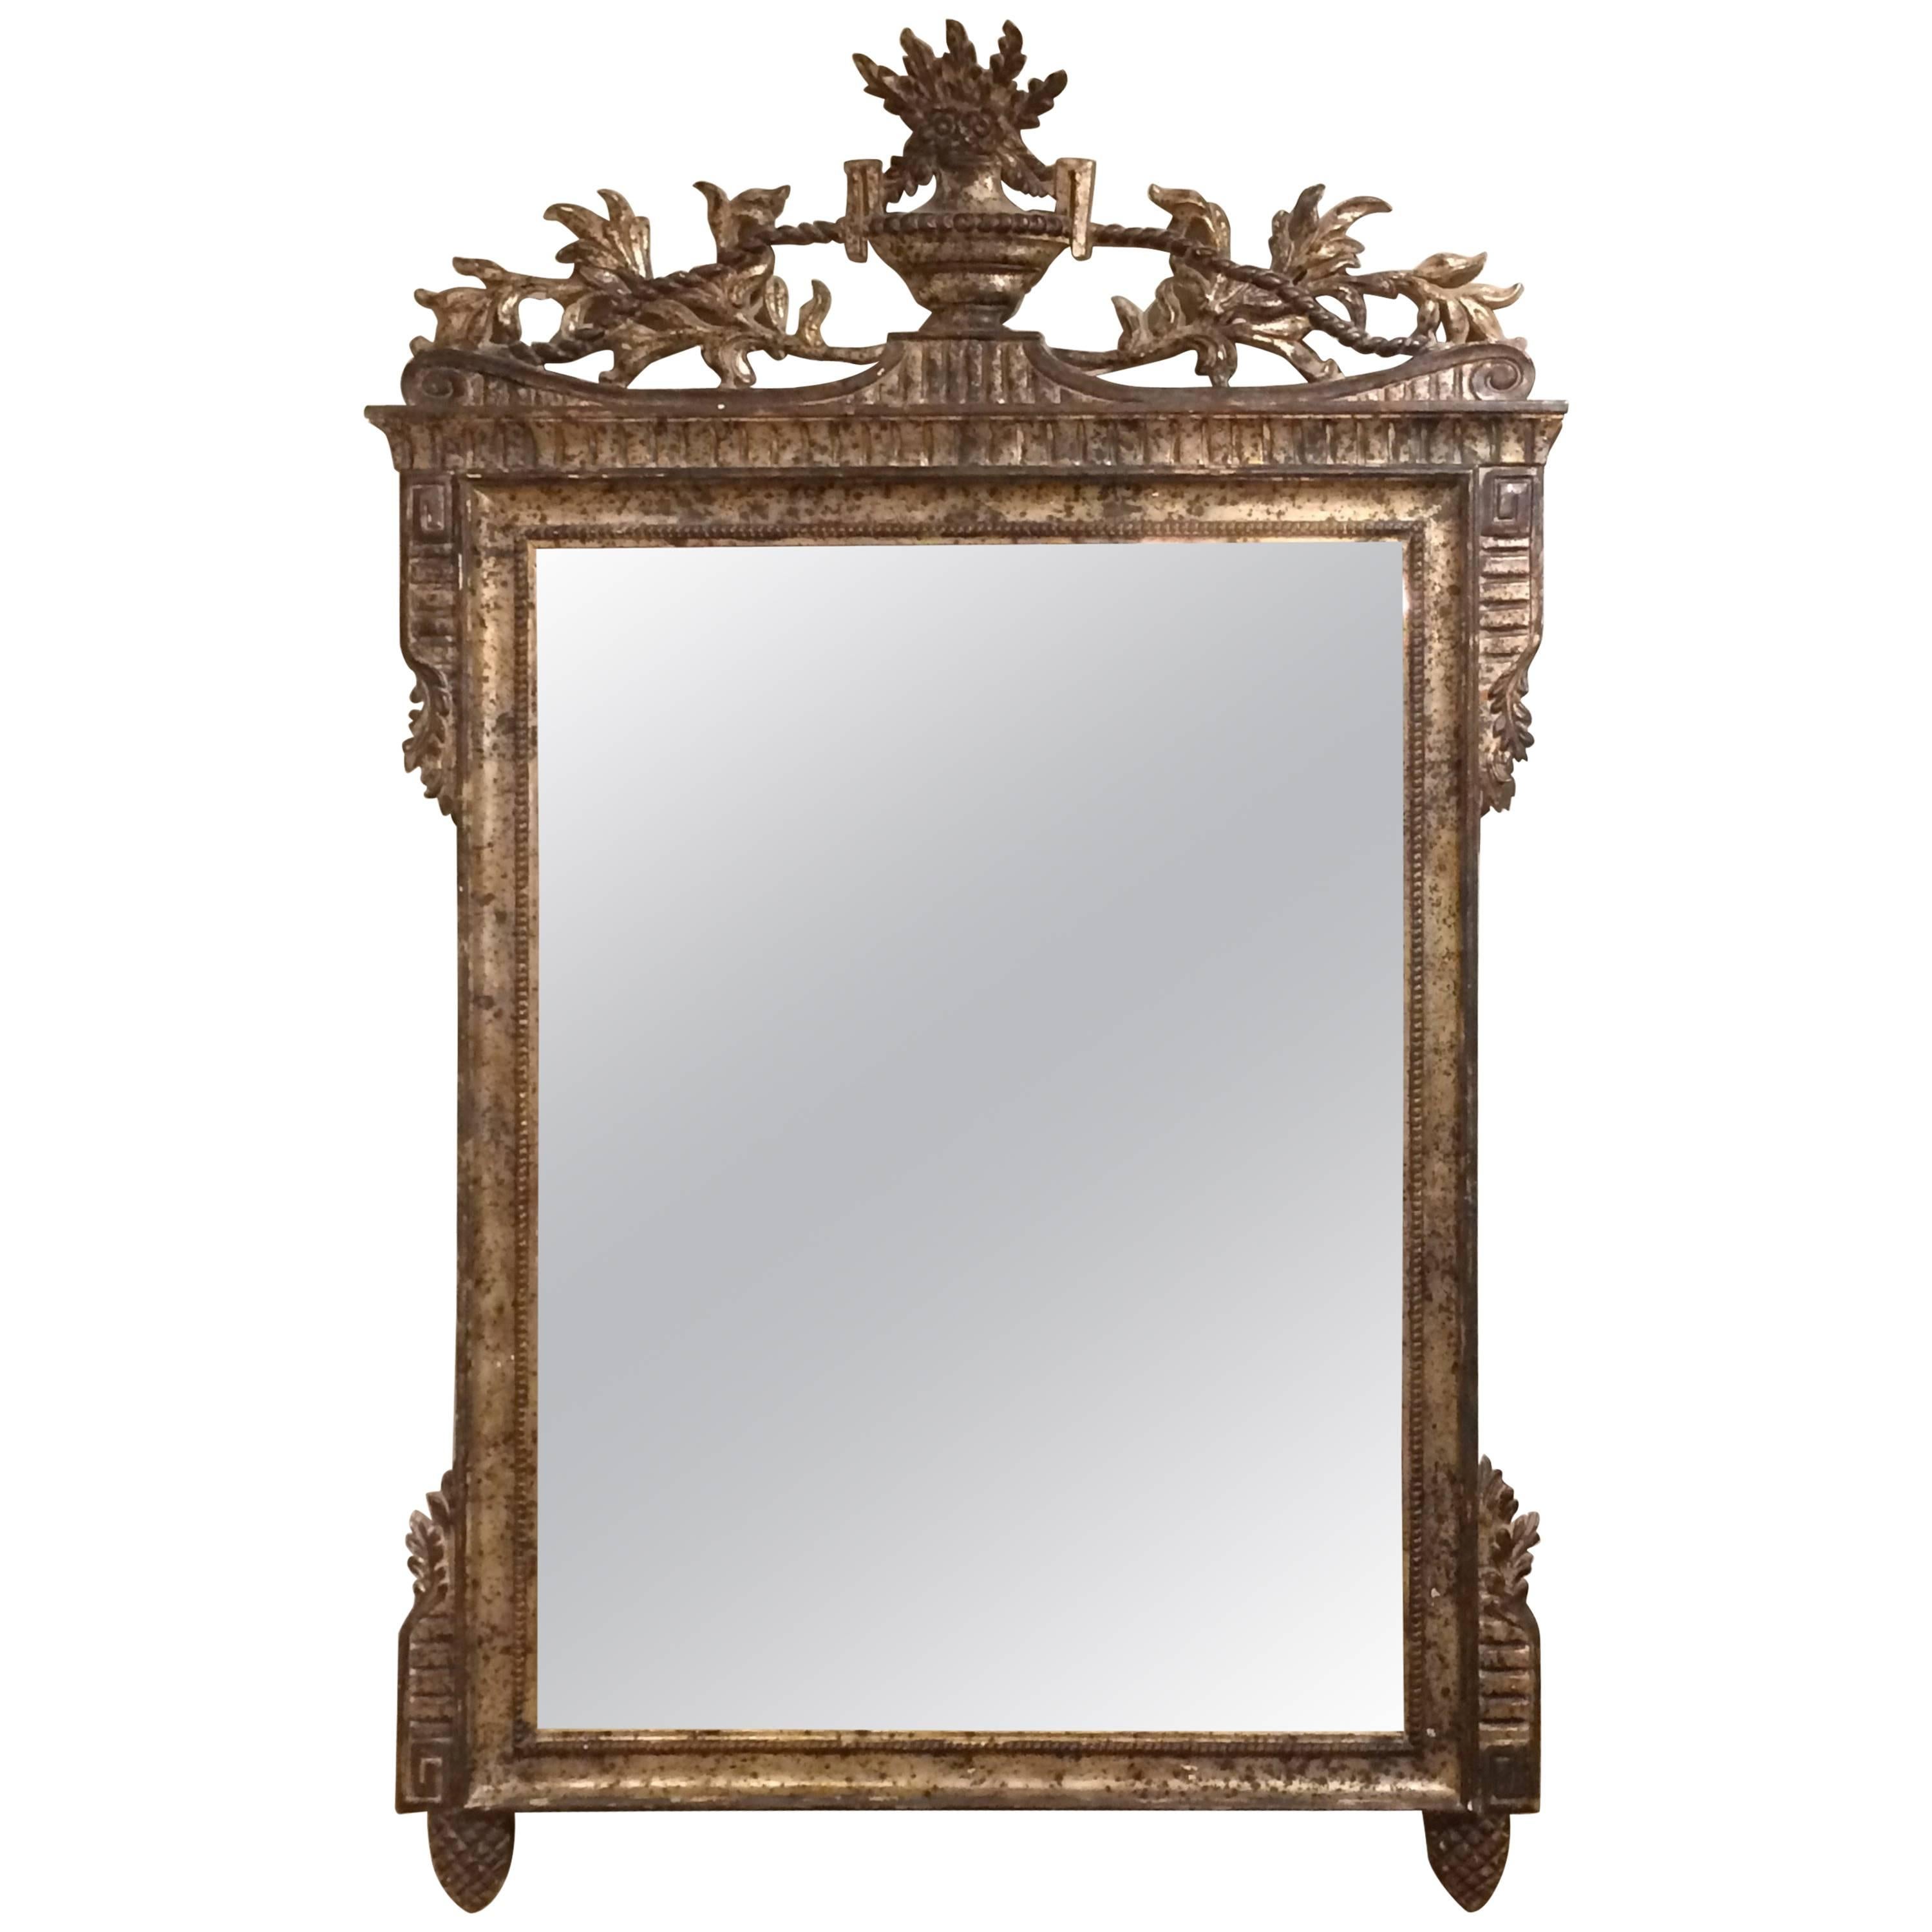 Monumentally Large Neoclassical Carved Silver Giltwood Mirror